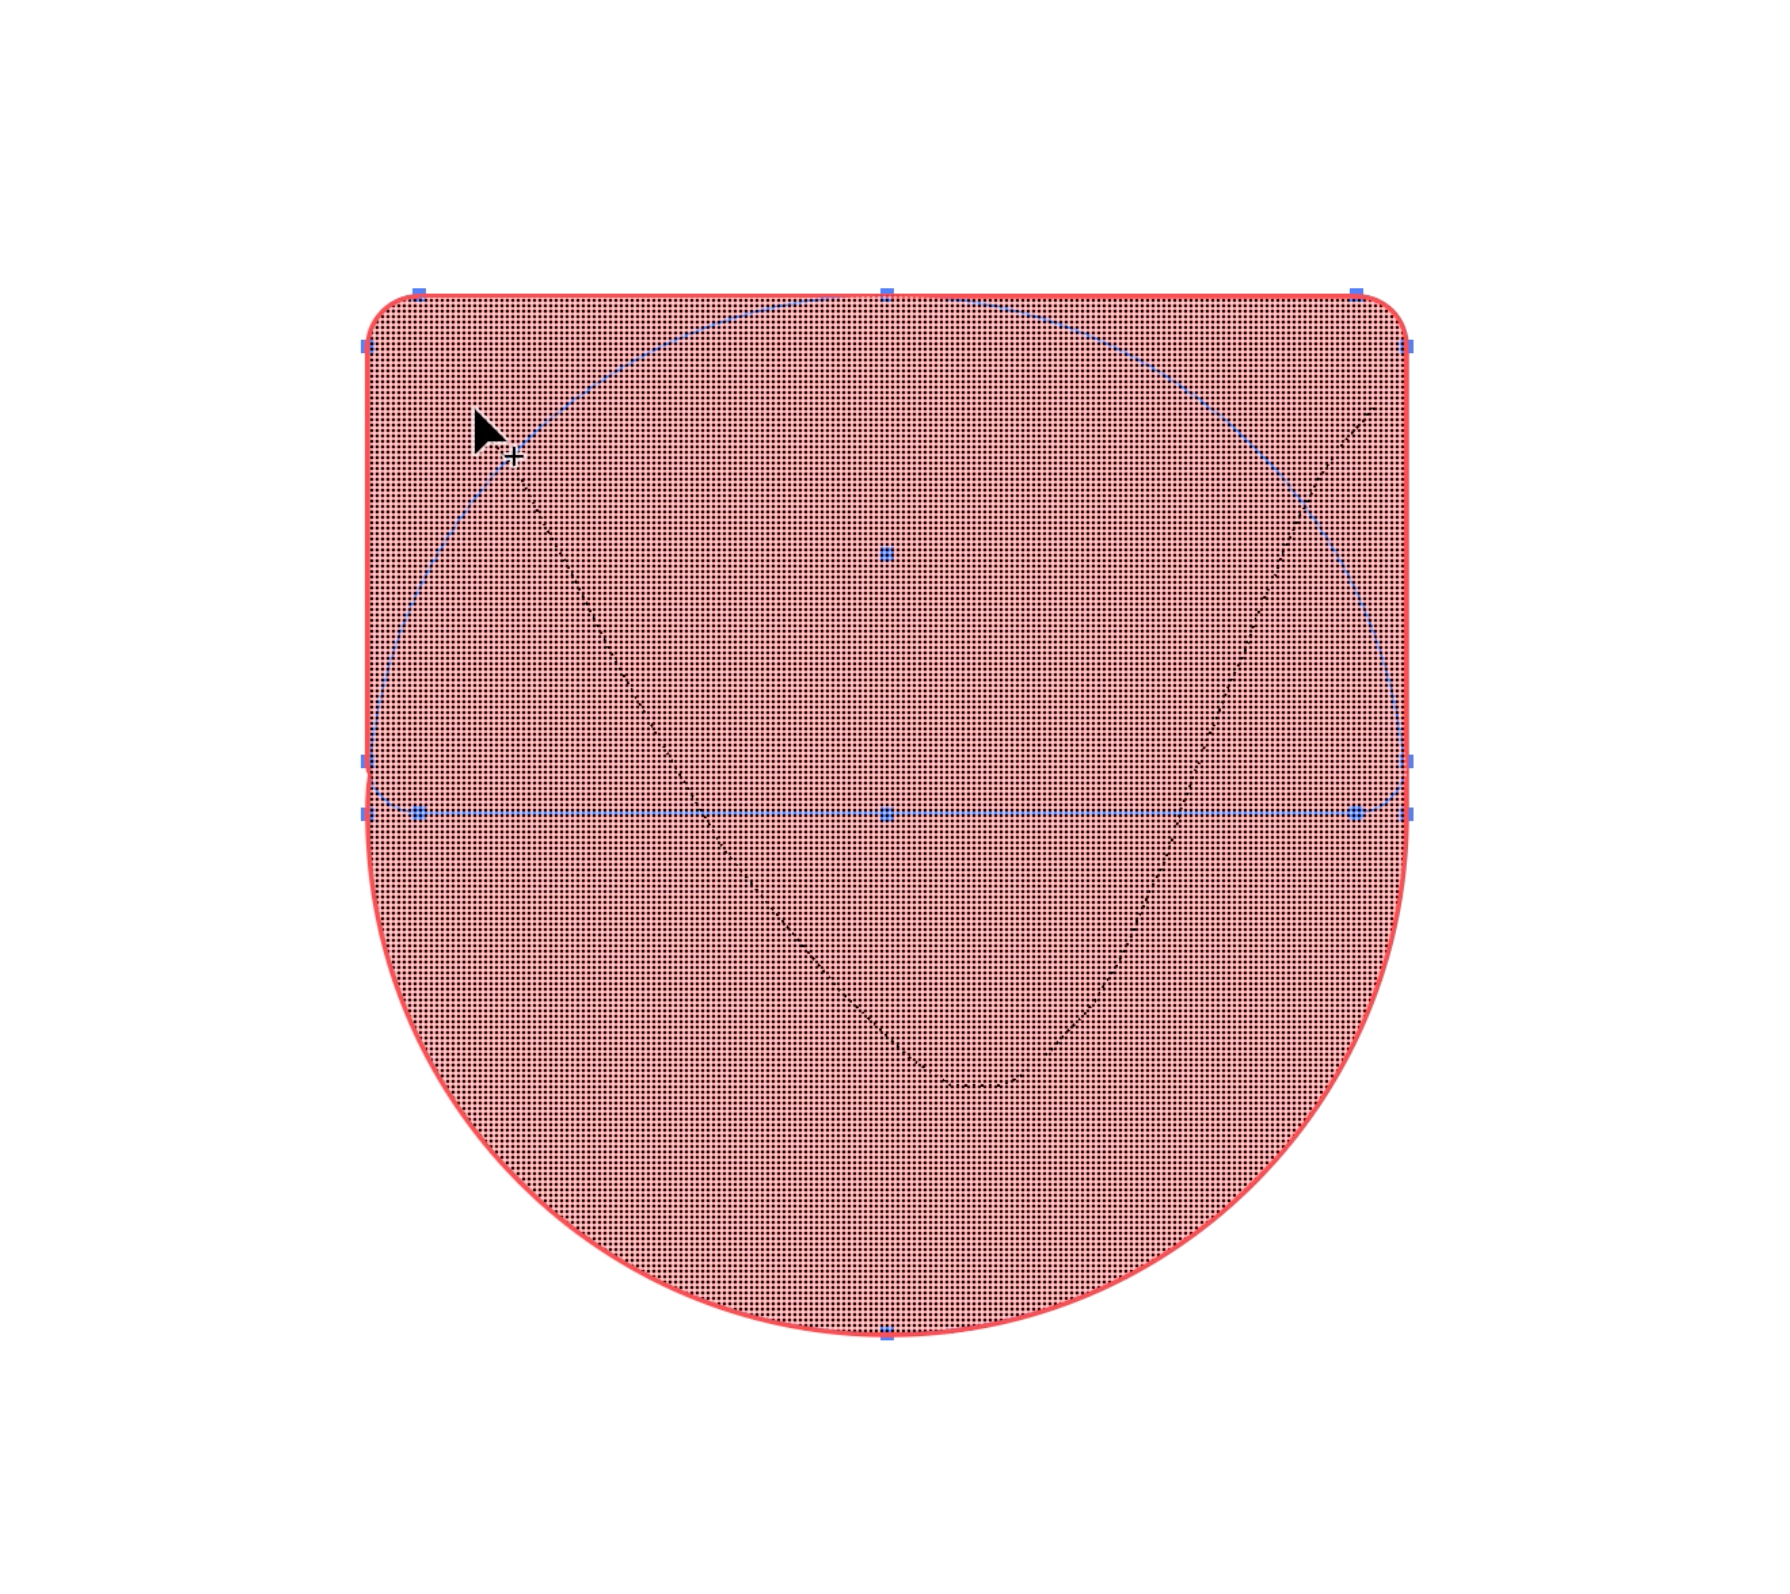 Using the Shape Builder Tool to drag through the pieces of both the circle and the rounded rectangle